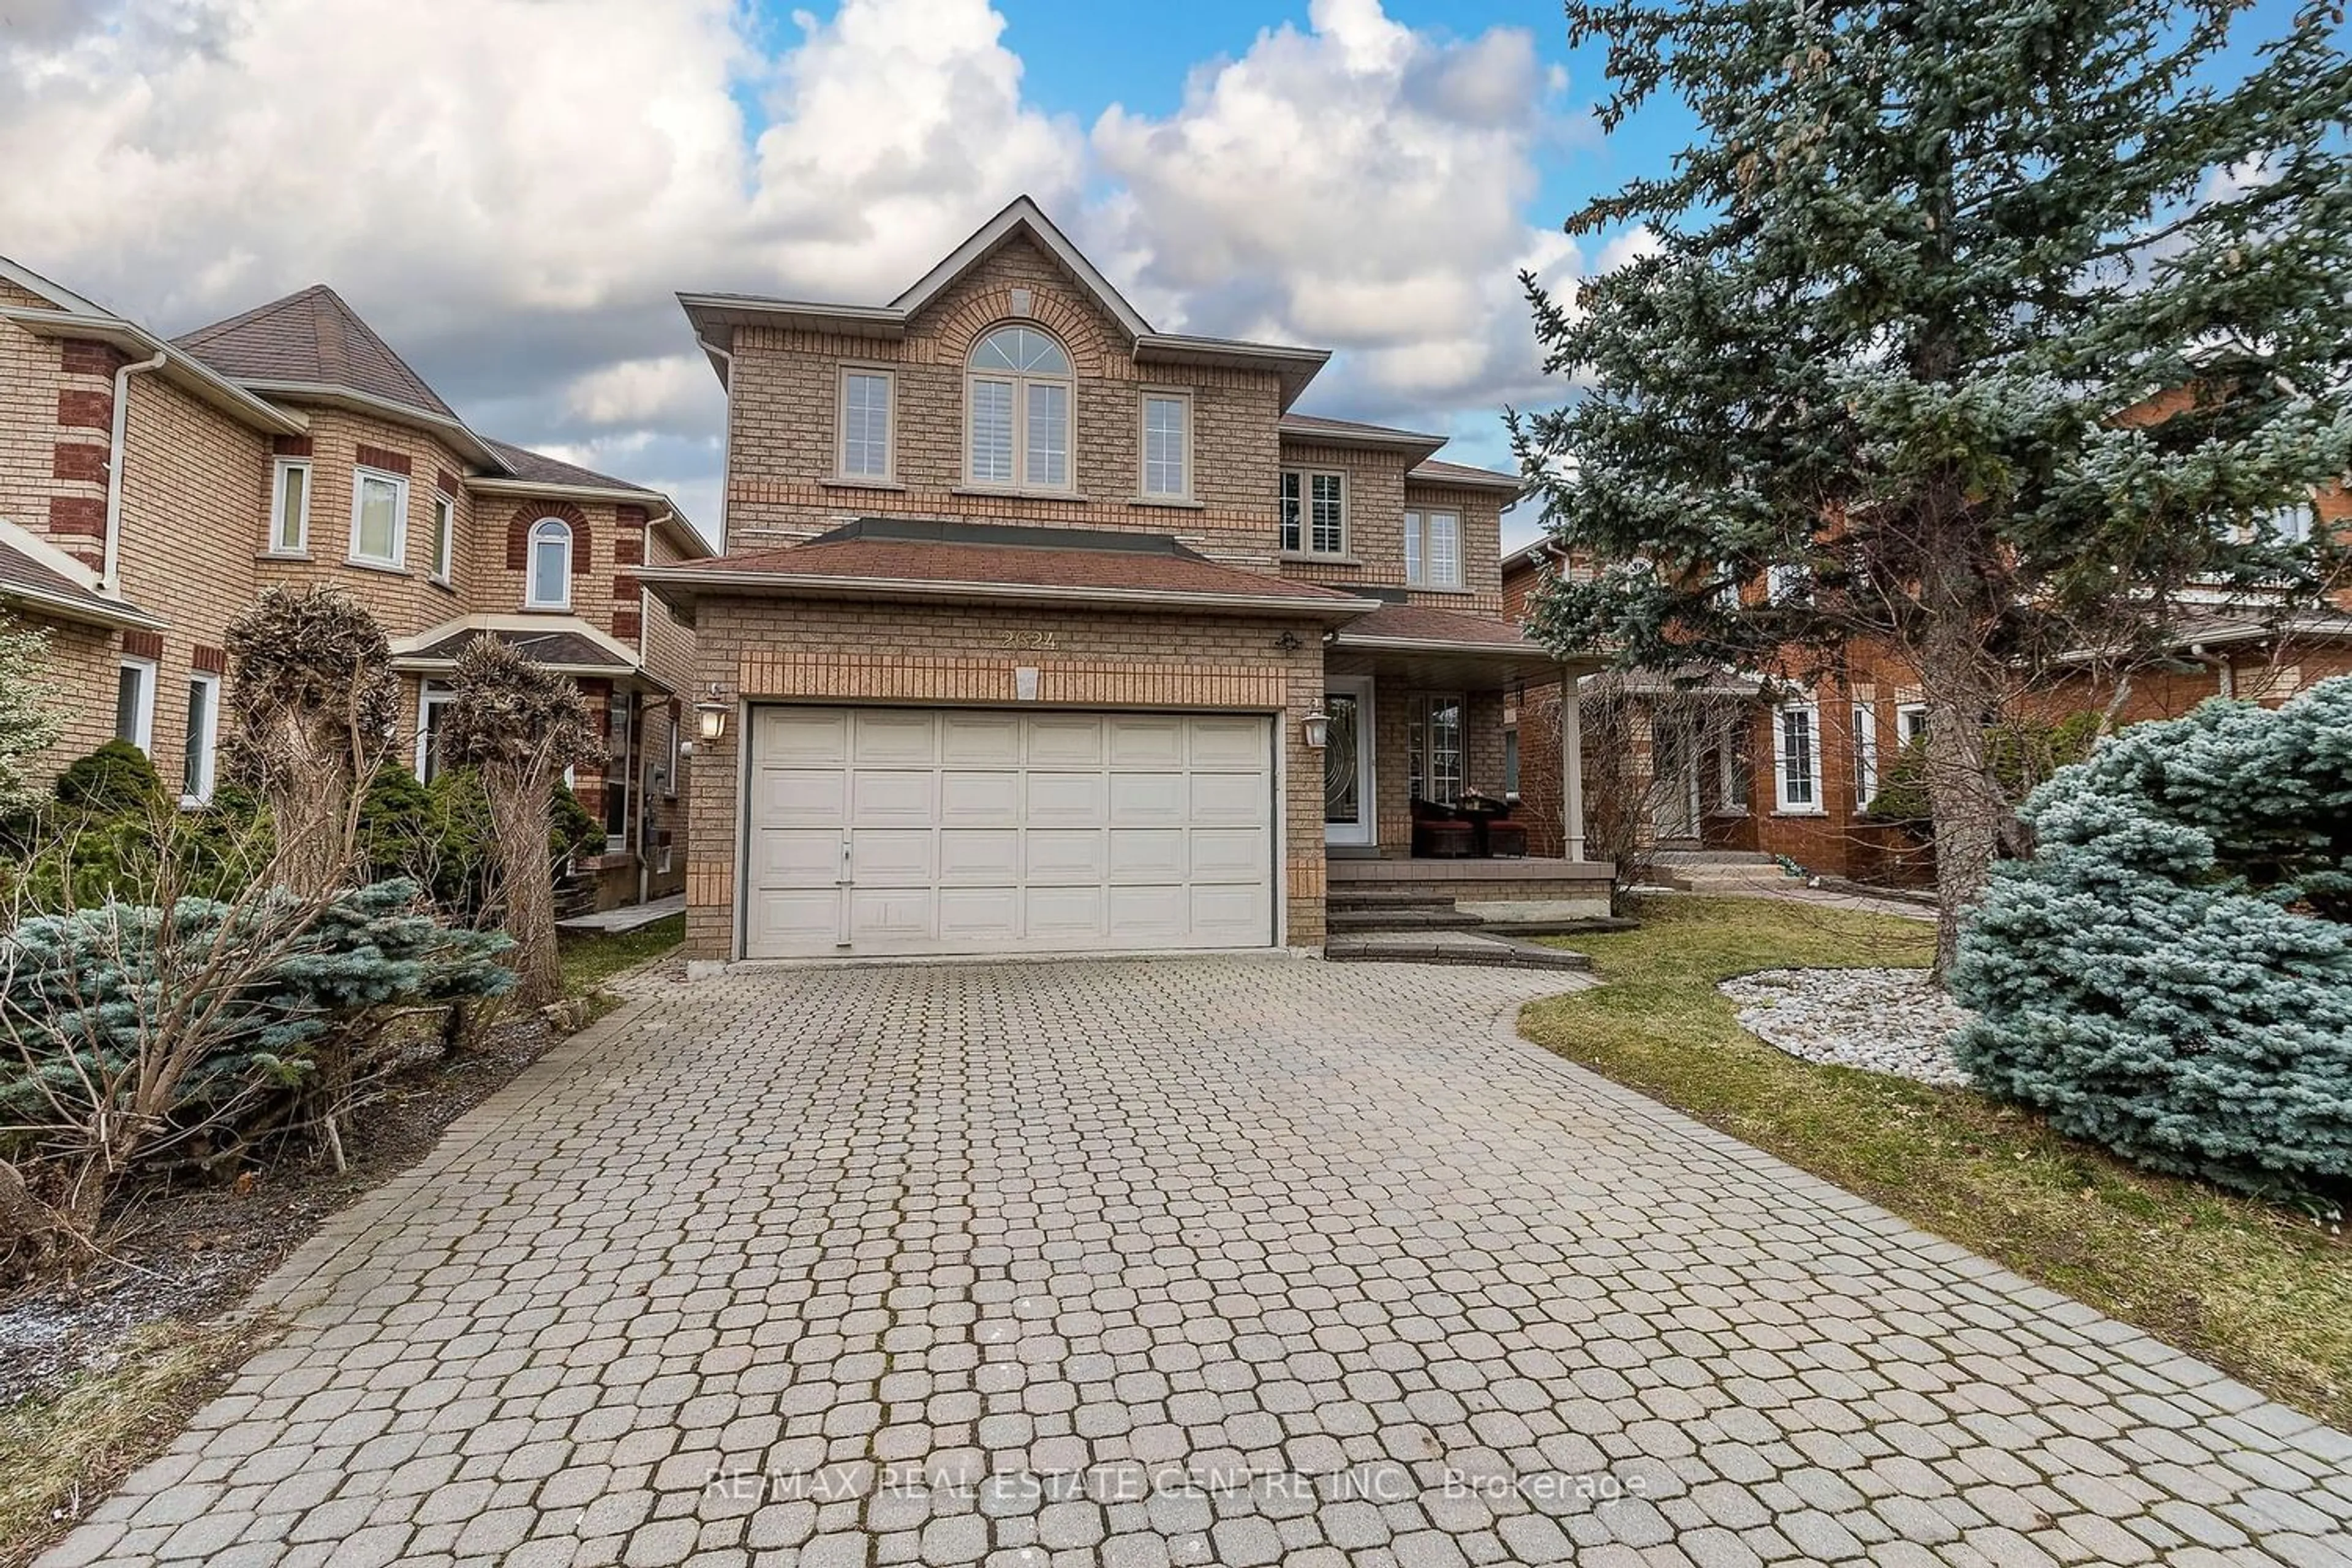 Home with brick exterior material for 2624 Comet Crt, Mississauga Ontario L5K 2S1